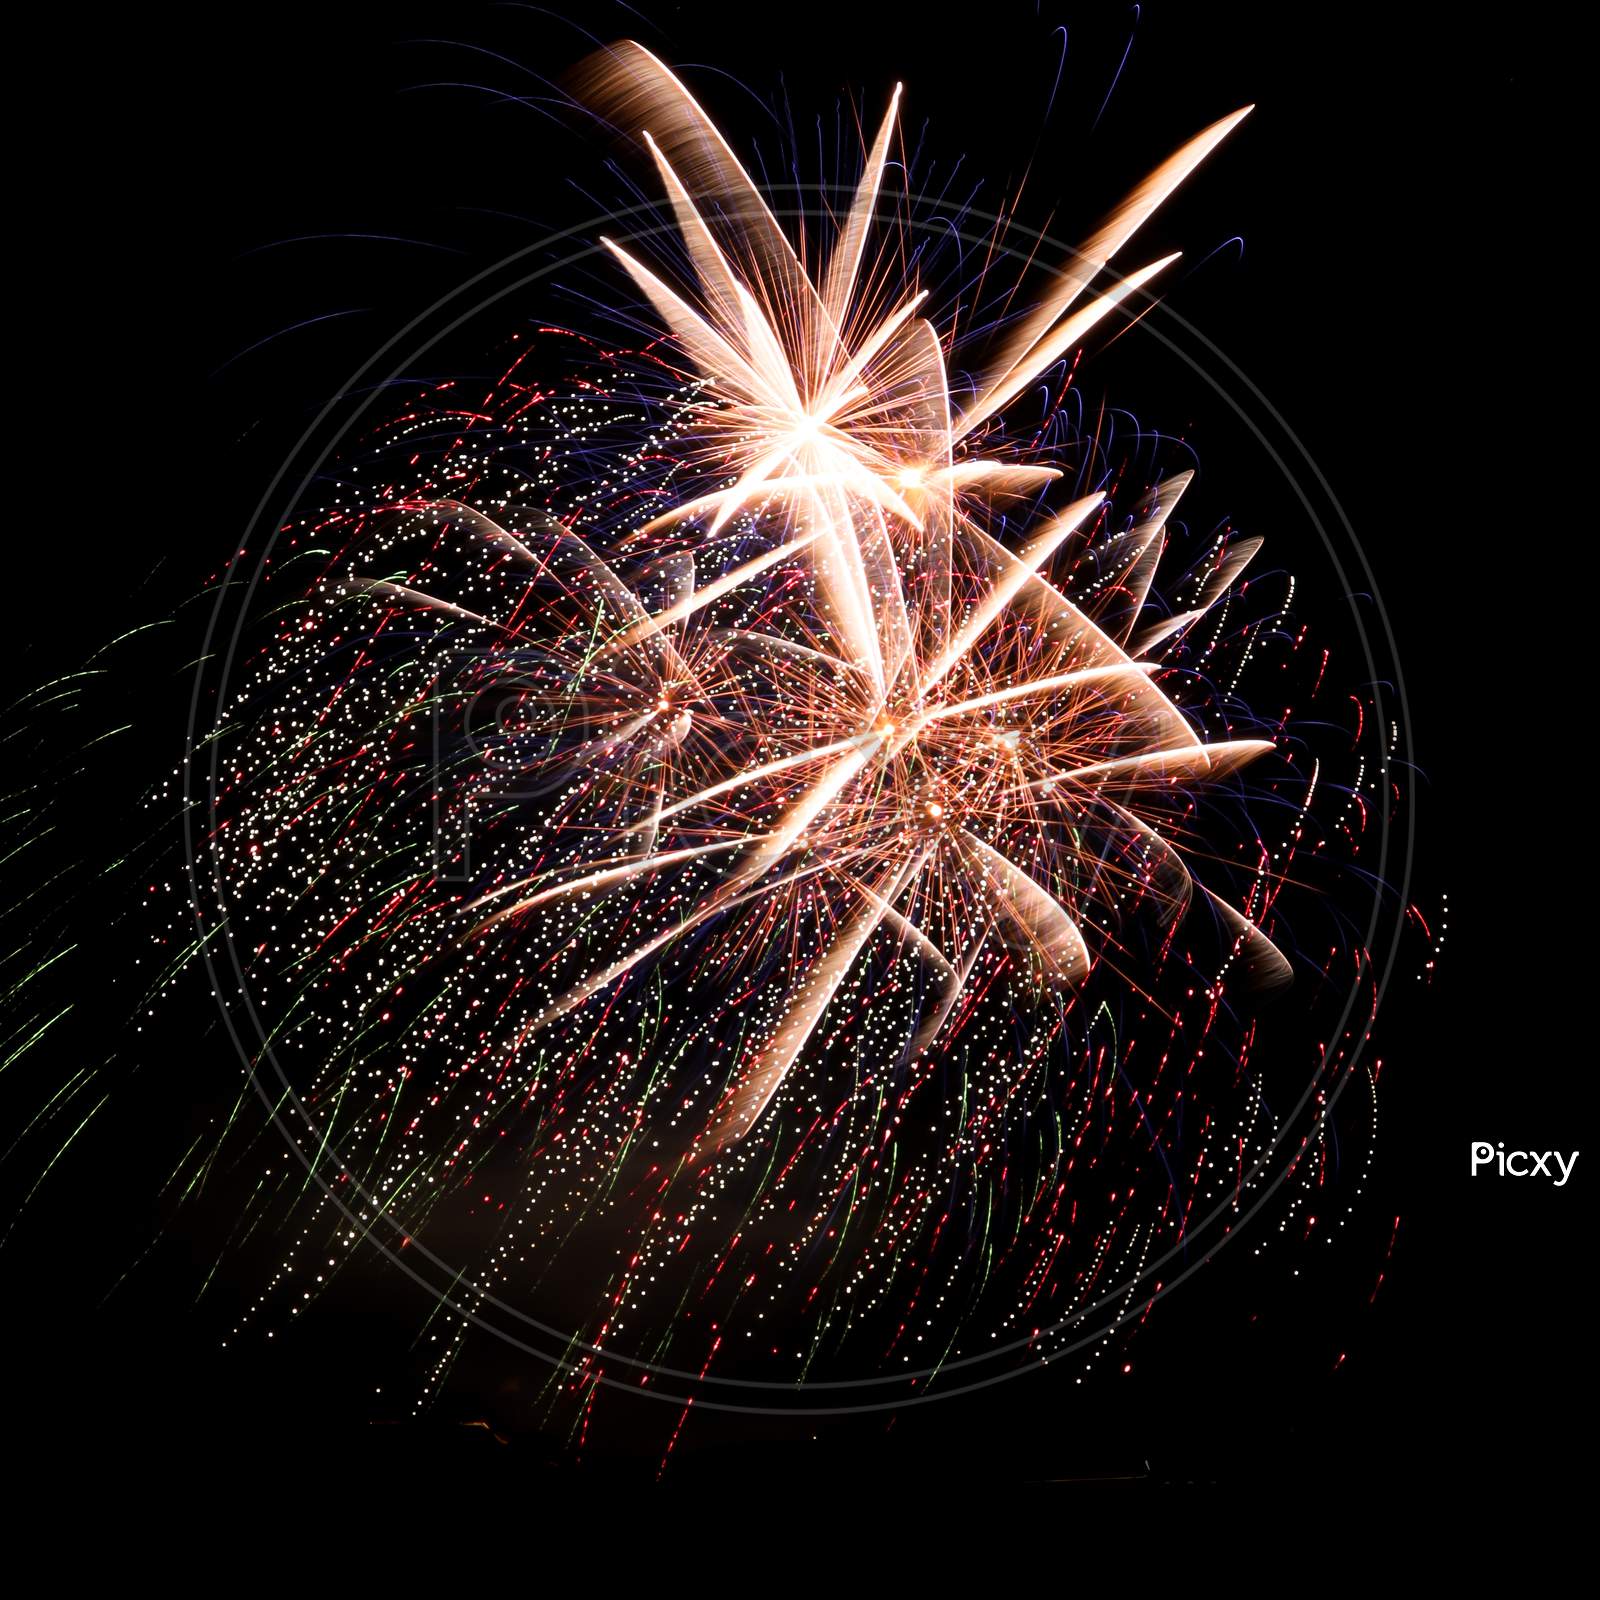 Bright Gold Fireworks With Streaks Of Color In The Background